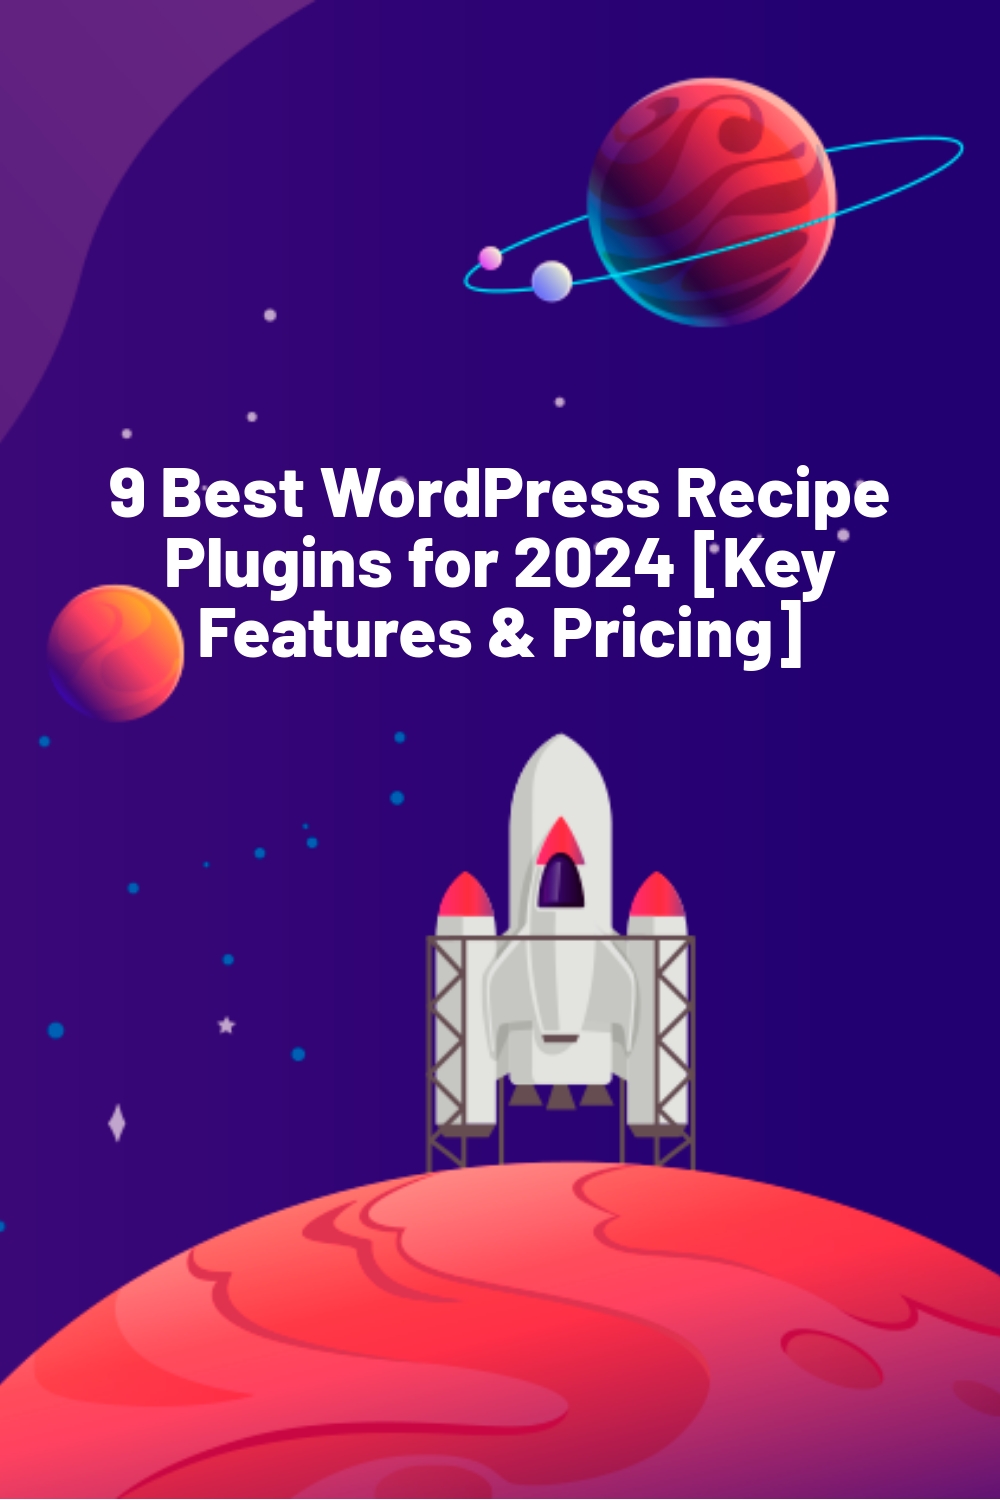 9 Best WordPress Recipe Plugins for 2024 [Key Features & Pricing]